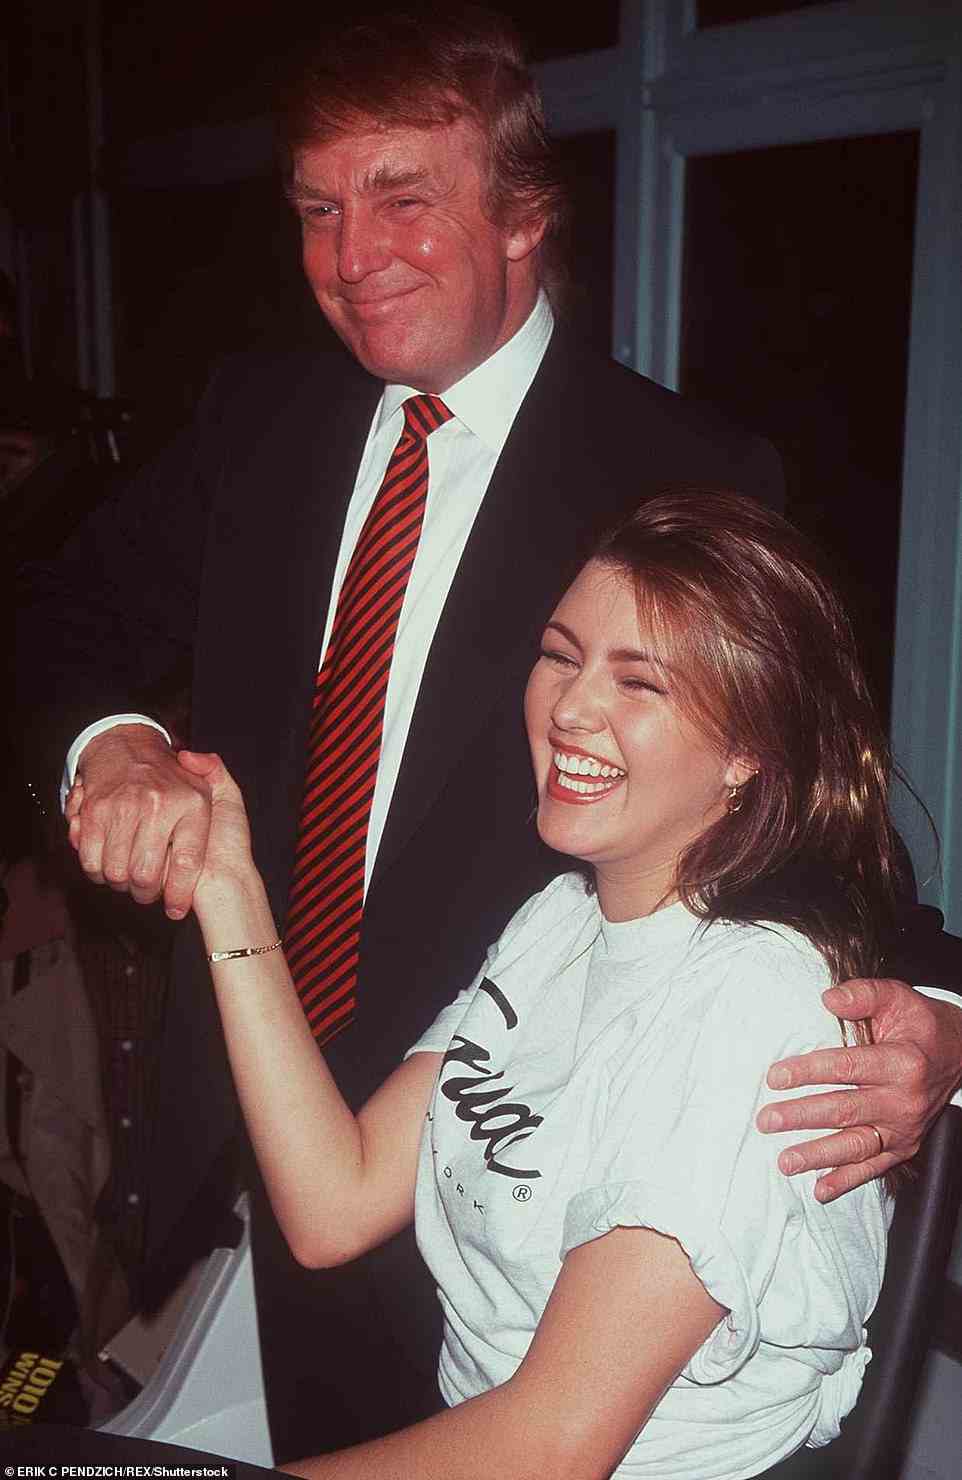 At the time, Donald Trump - who was the co-owner of the Miss Universe Organization at the time - called her 'an eating machine' and 'Miss Piggy' on Howard Stern's radio show. They are pictured in 1997